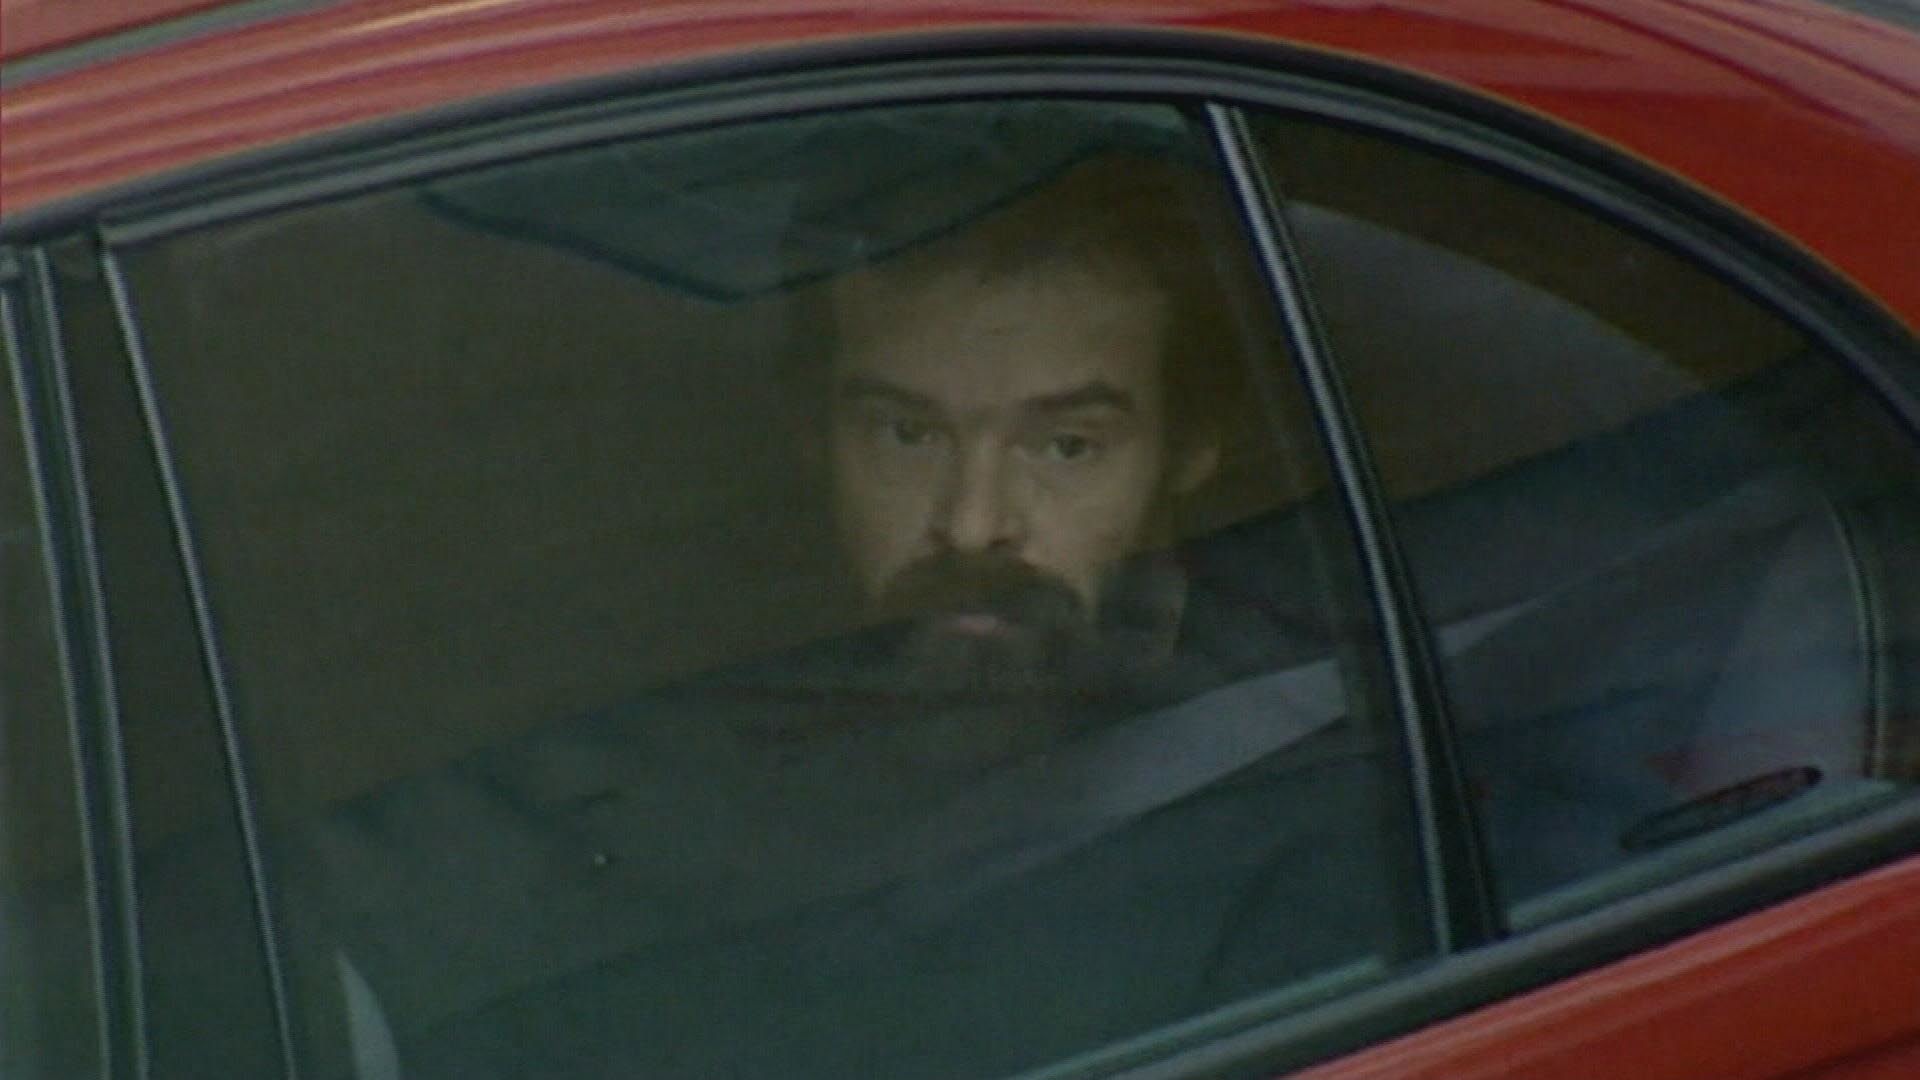 Snowtown accomplice could be released earlier than expected